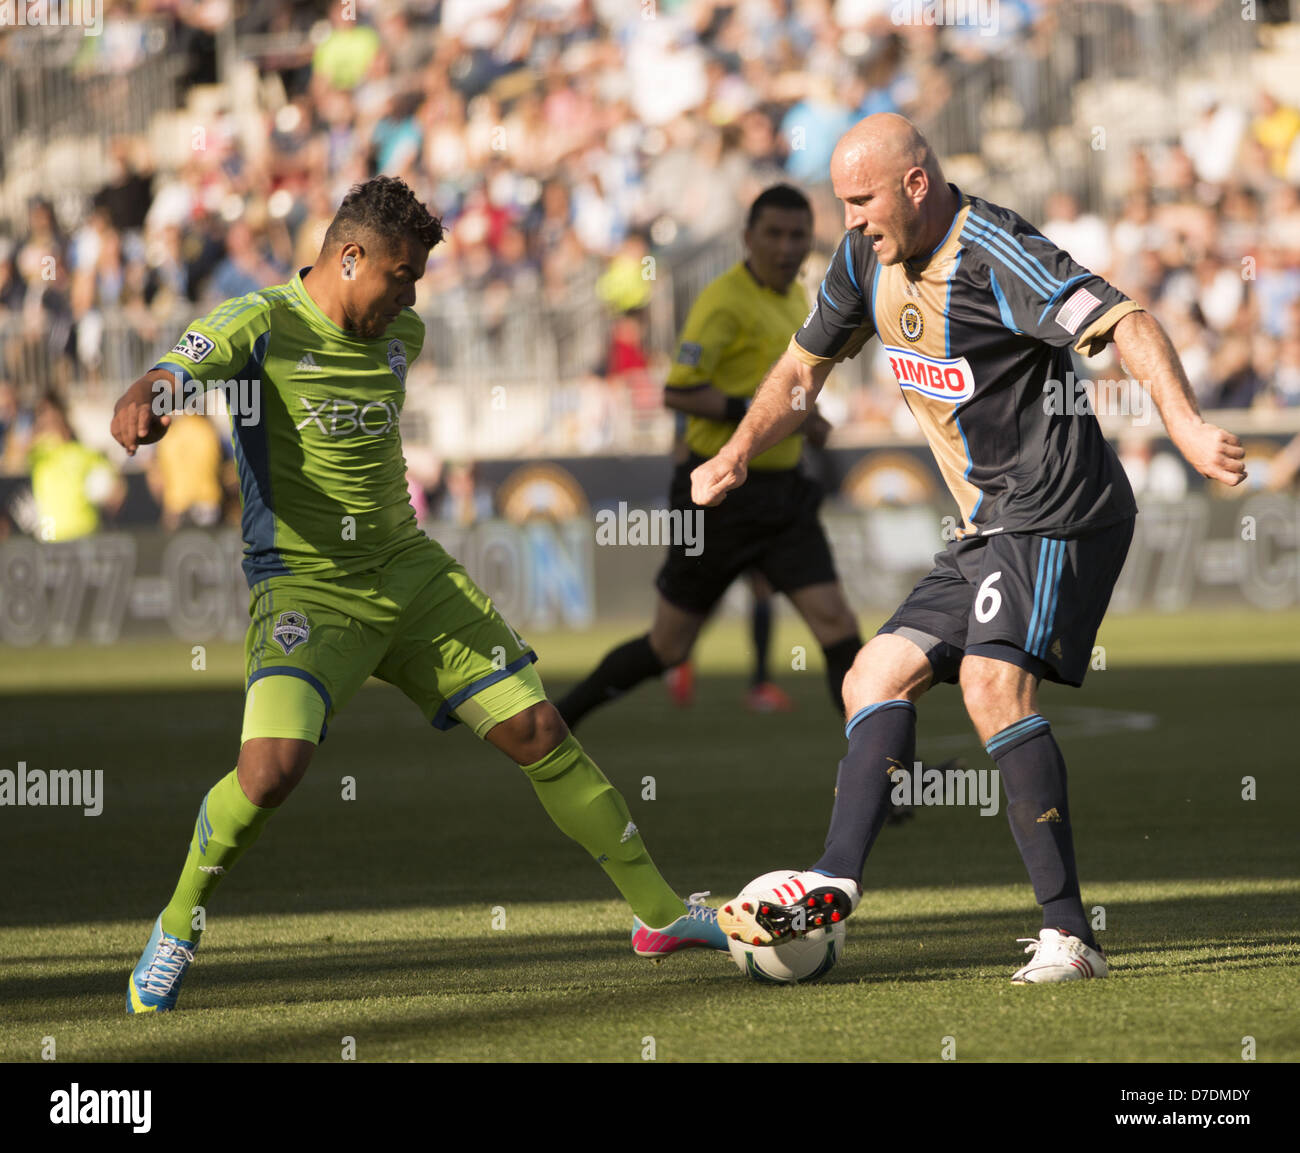 Chester, Pennsylvania, USA. 4th May, 2013. Philadelphia Union's CONOR CASEY (6) in action against a Seattle Sounder's MARIO MARTINEZ (15) The Union and the Sounders played to a 2-2 draw at the Unions home field, PPL Park (Credit Image: © Ricky Fitchett/ZUMAPRESS.com) Stock Photo